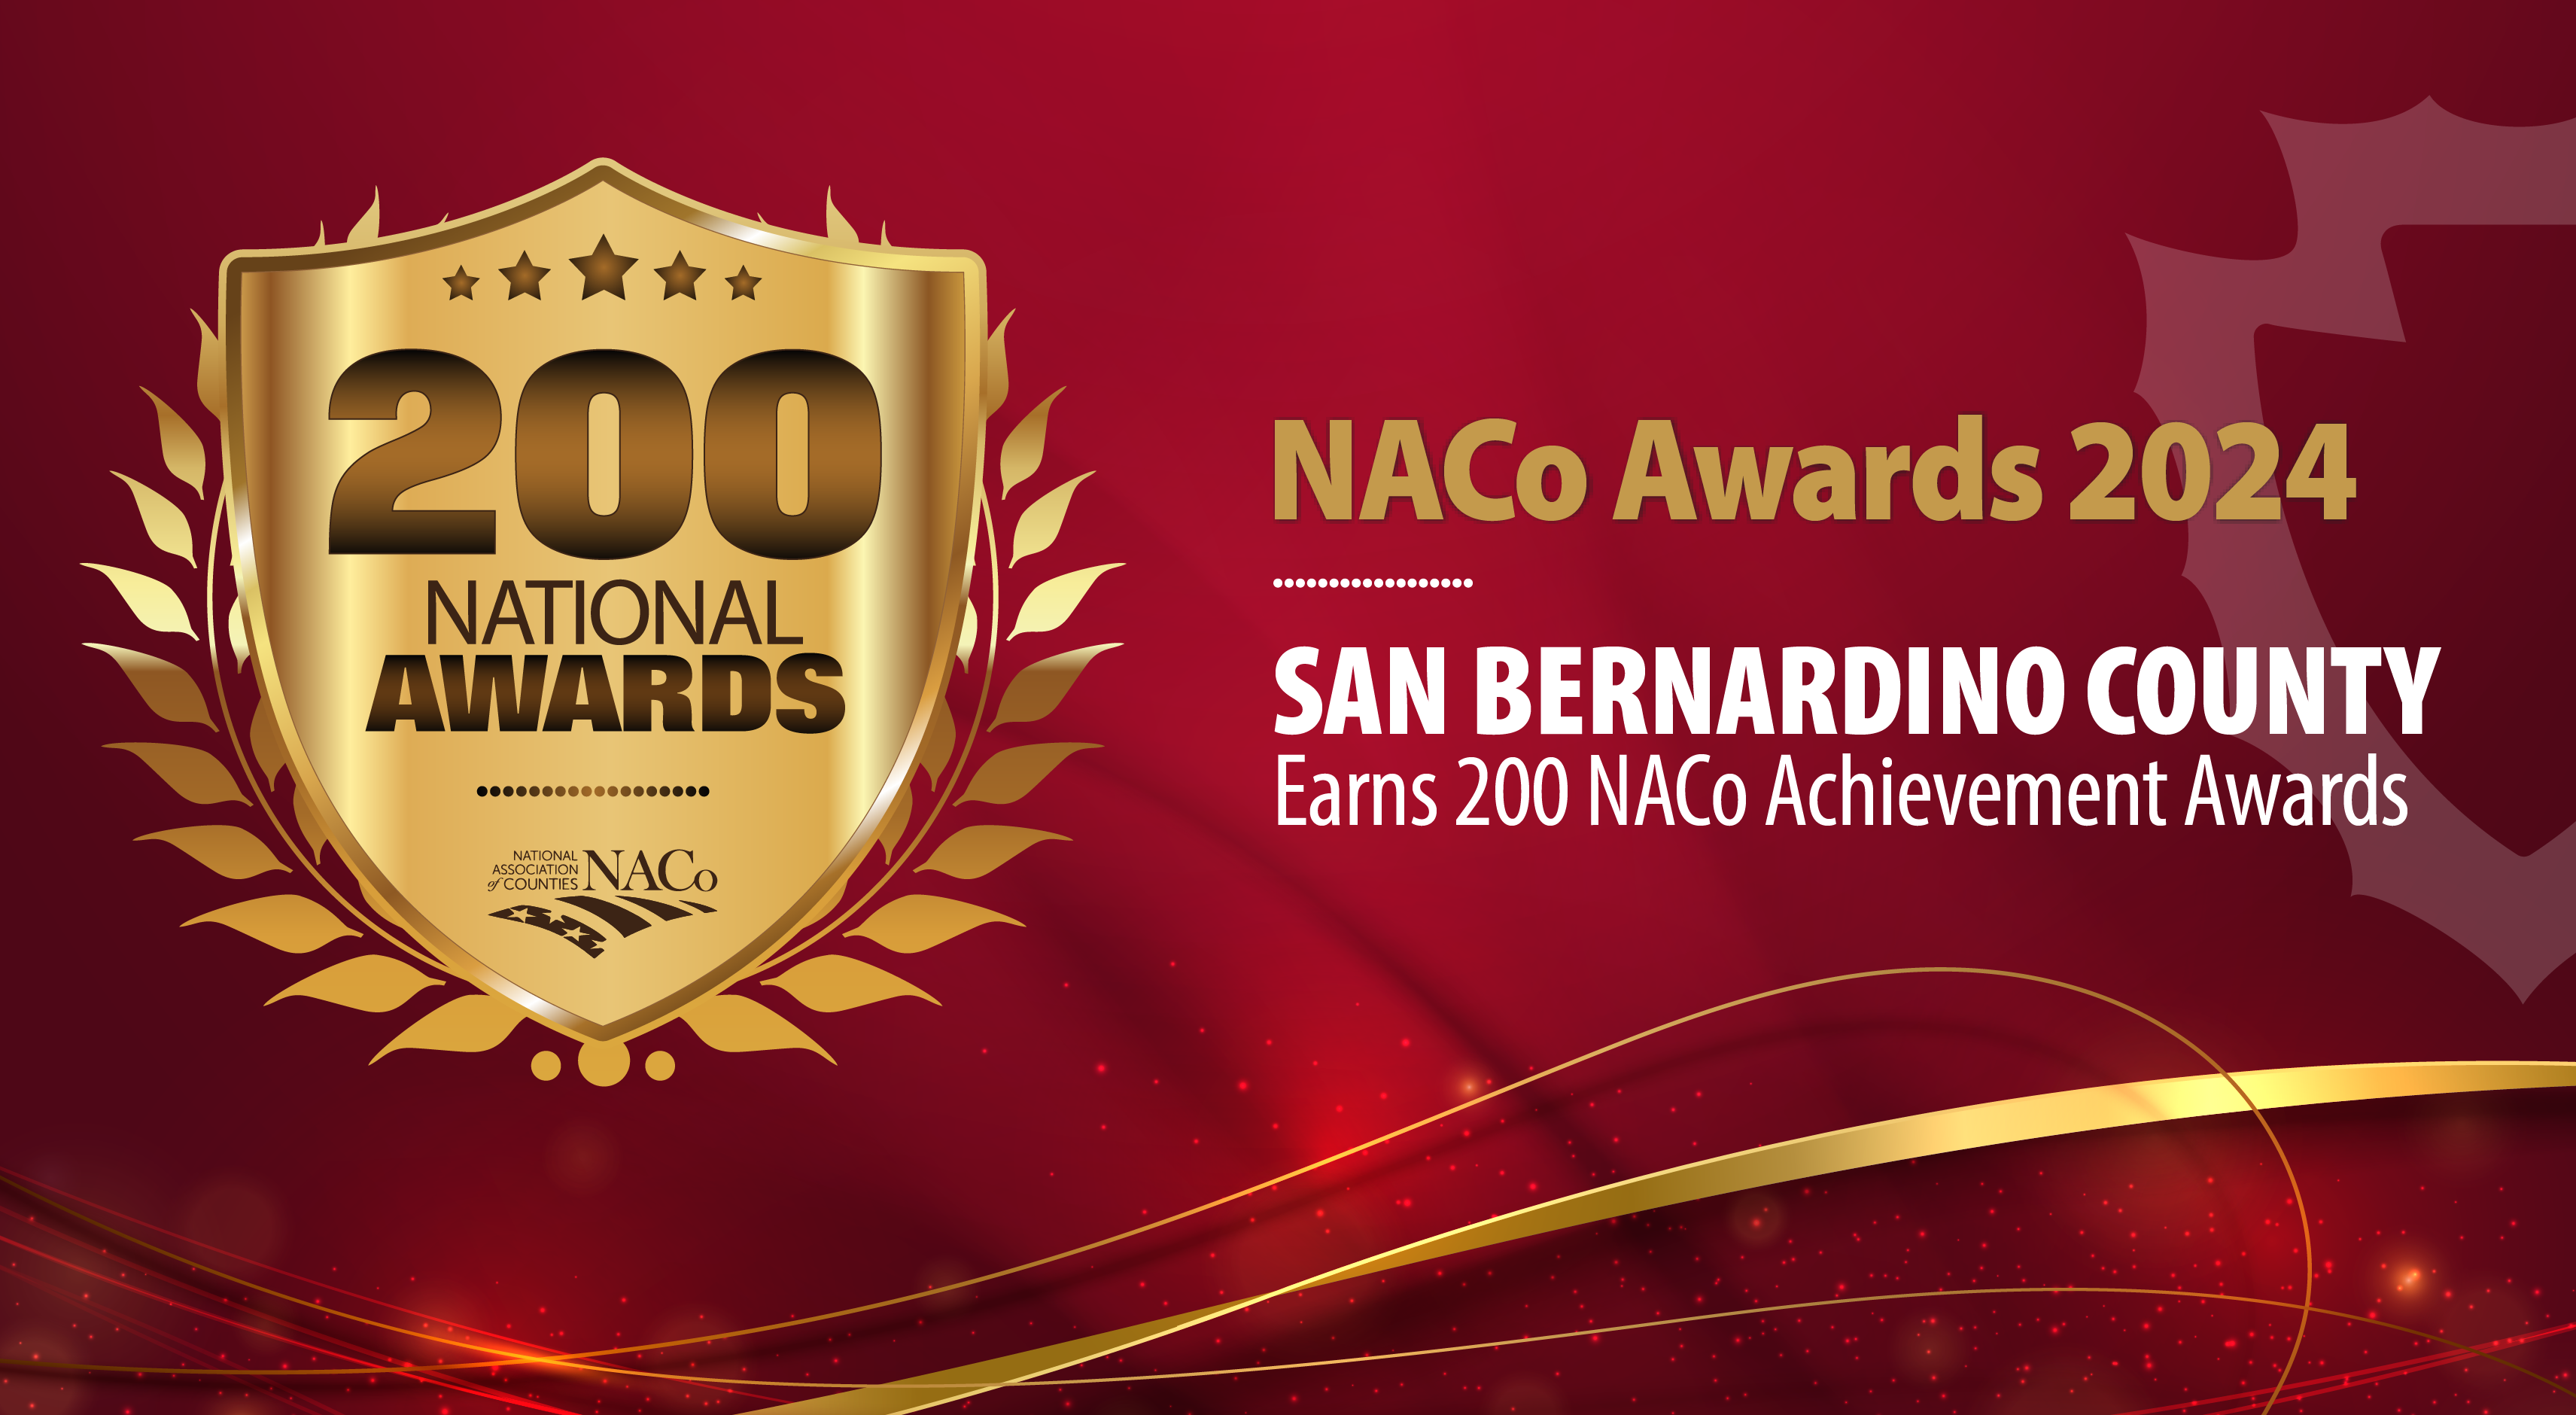 A graphic advertising the NACo awards with a gold medal with the number 200 against a dark burgundy background and gold swooshes.